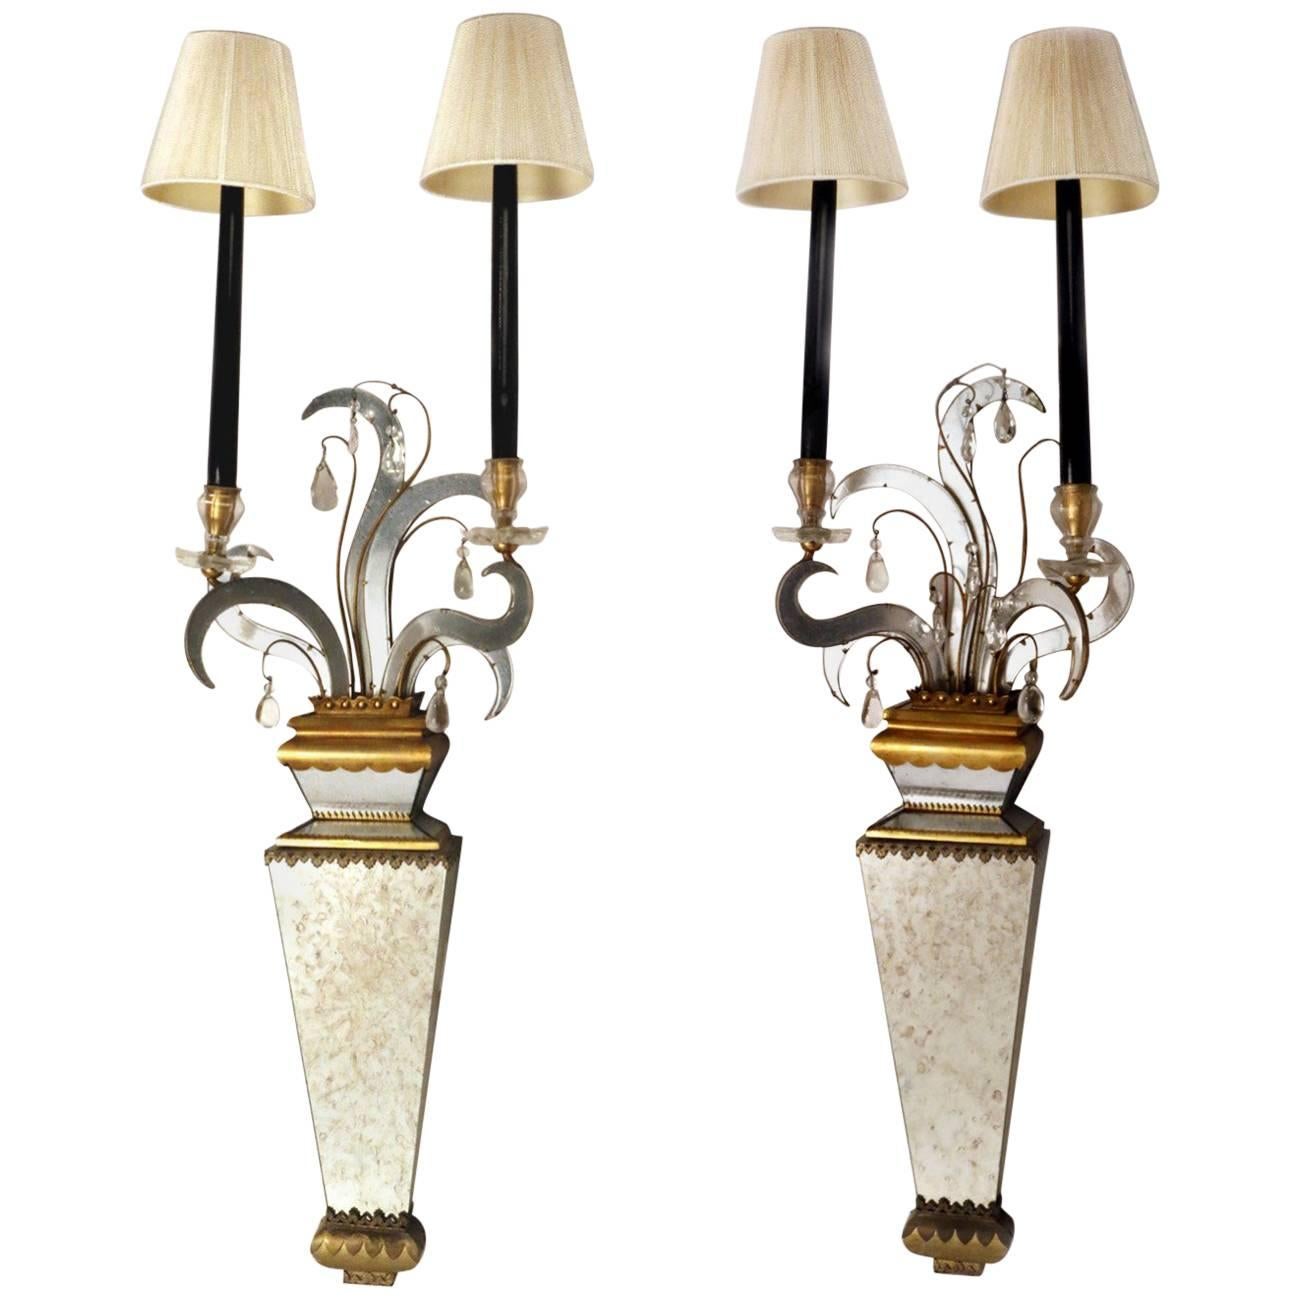 Pair of Two-Light Mirrored Wall Sconces,